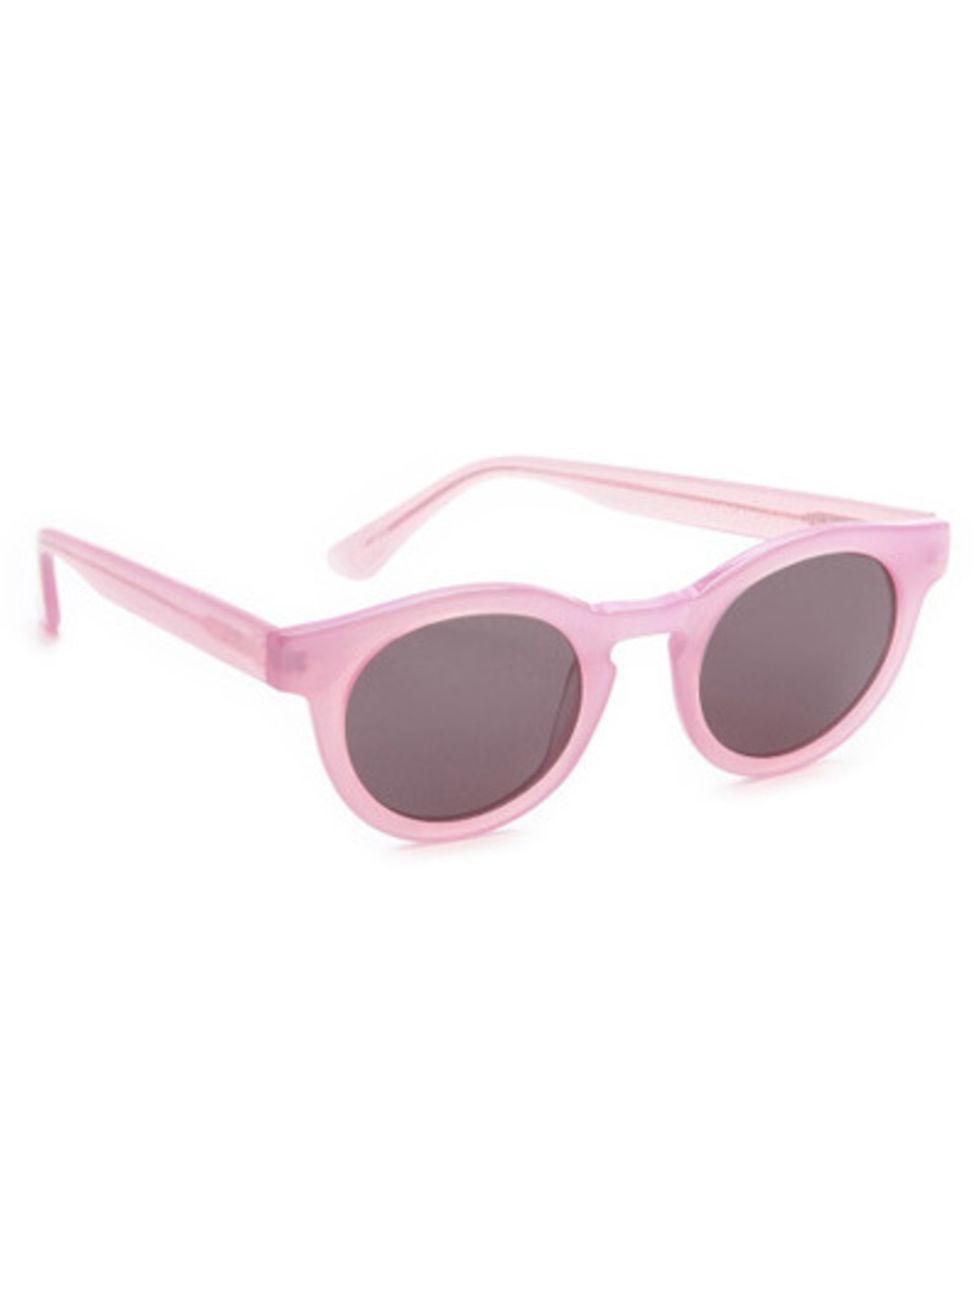 Eyewear, Vision care, Product, Brown, Goggles, Personal protective equipment, Pink, Glass, Sunglasses, Magenta, 